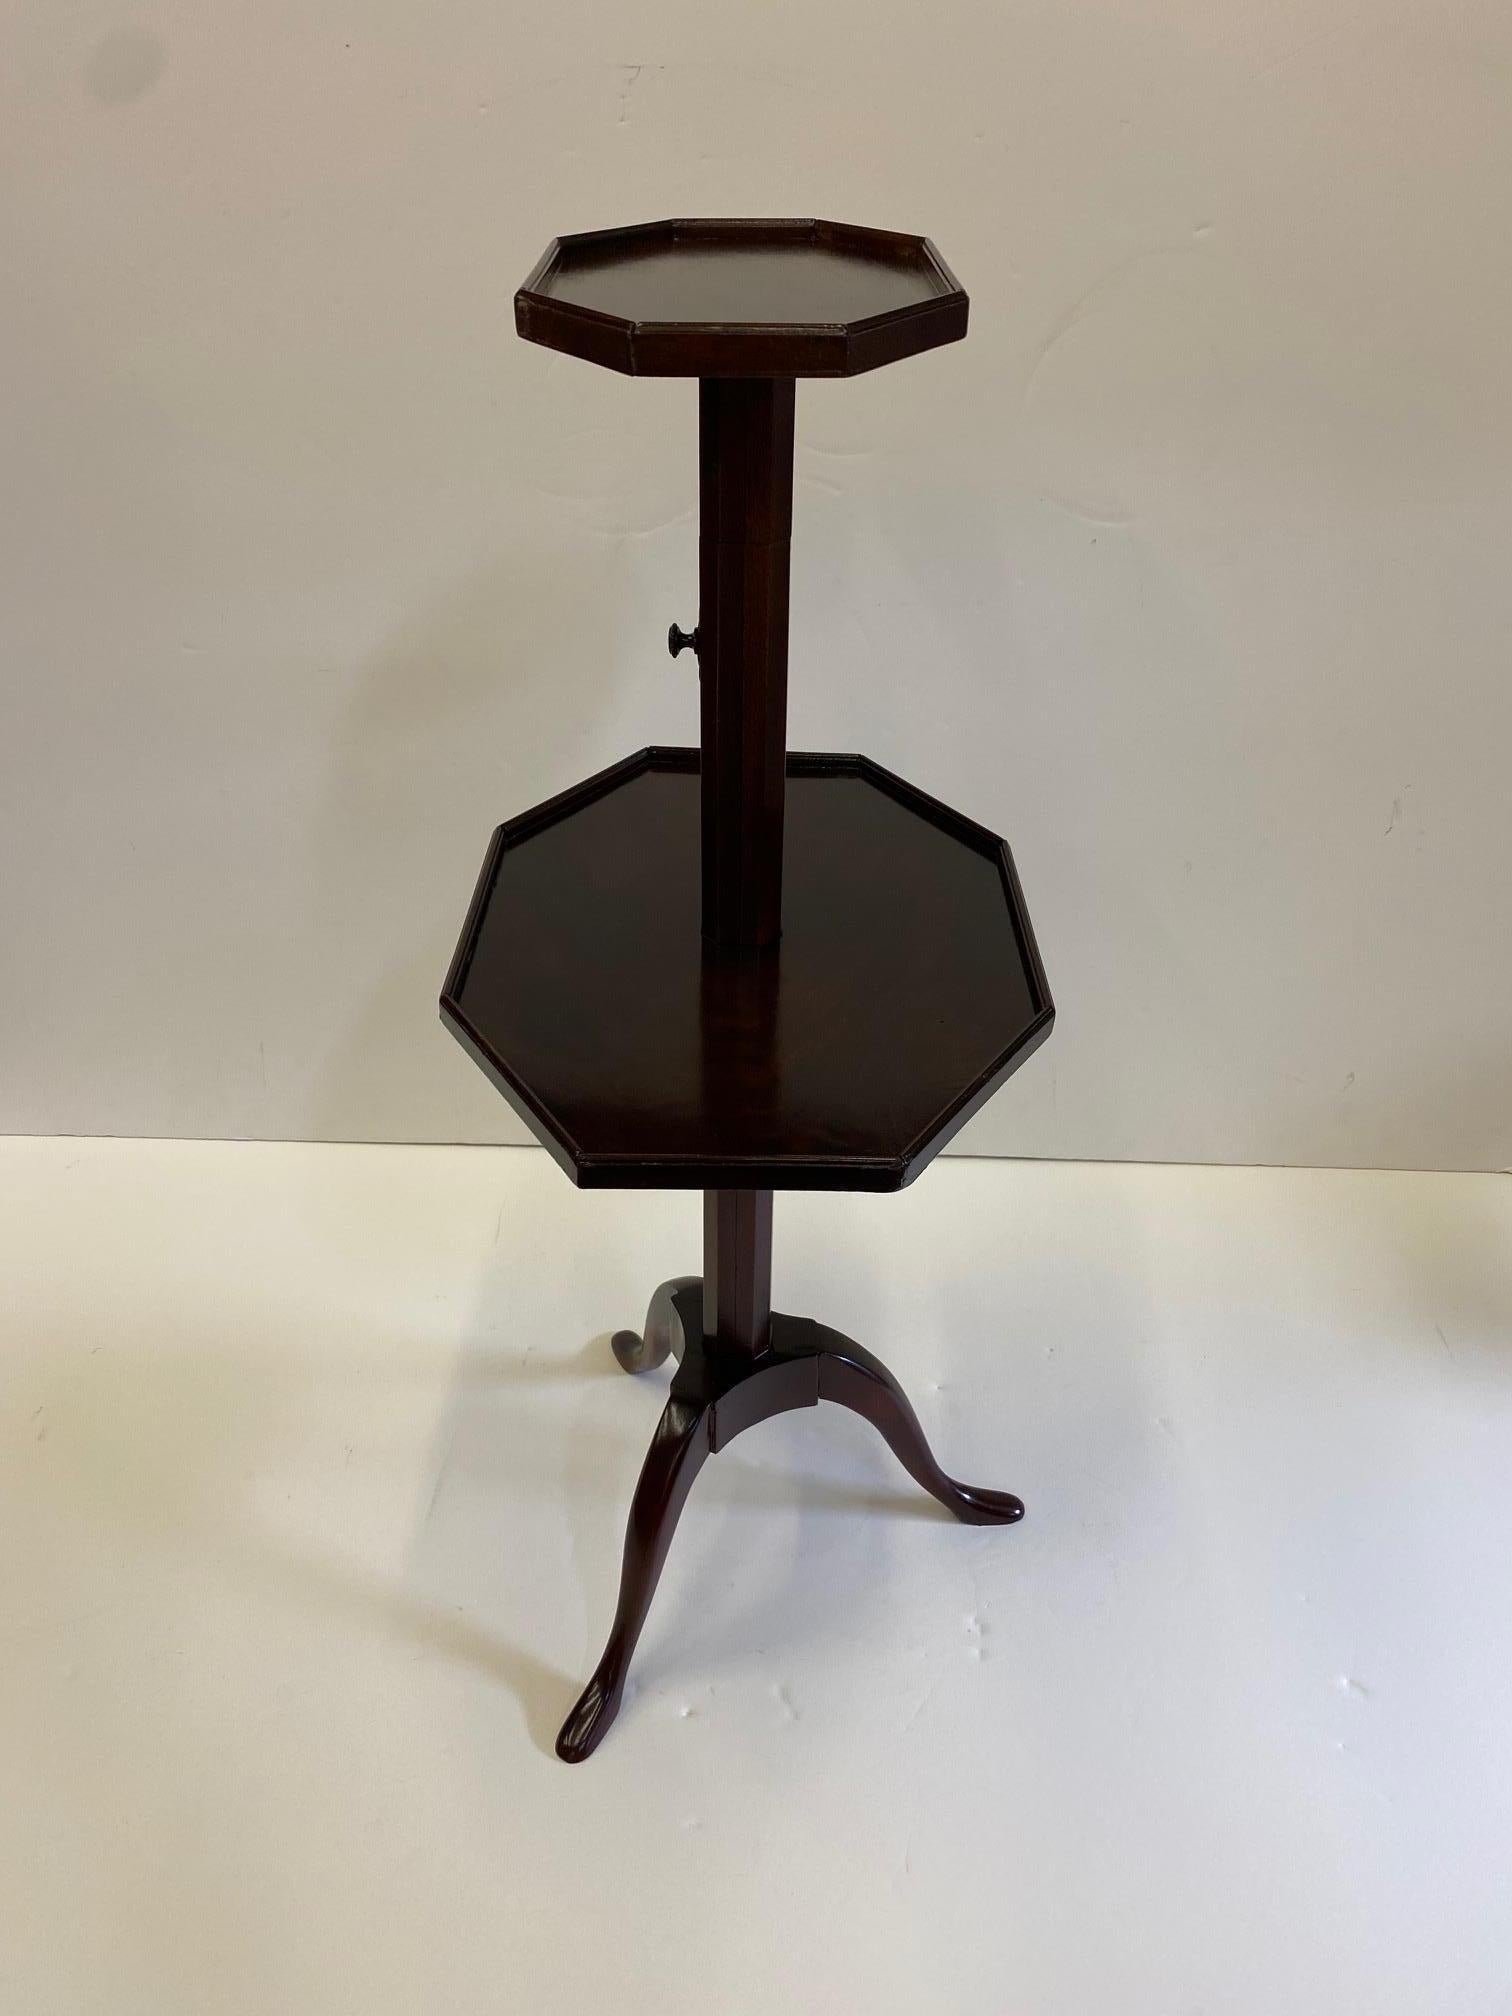 An elegant antique mahogany side table having a lovely unusual shape with two tiers of octagonal surfaces and pretty tripod legs. Table is adjustable.
Measures: Closed 31.5 H fully extended 35.5
Base is 16 W, 13 D
Large shelf 16 x 12
Small shelf